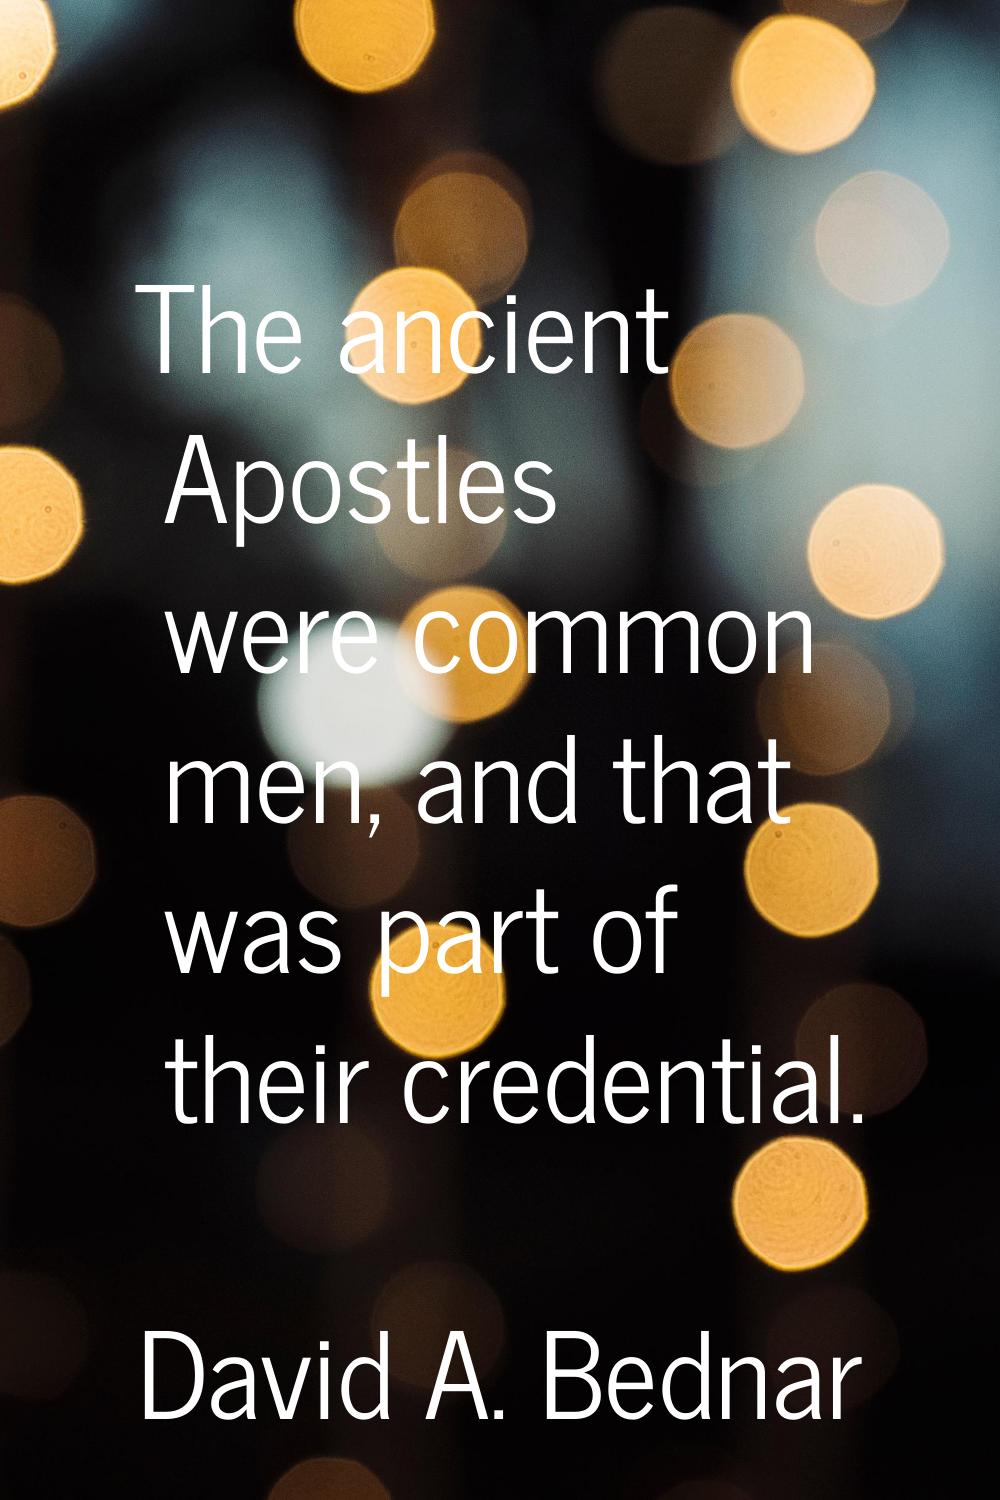 The ancient Apostles were common men, and that was part of their credential.